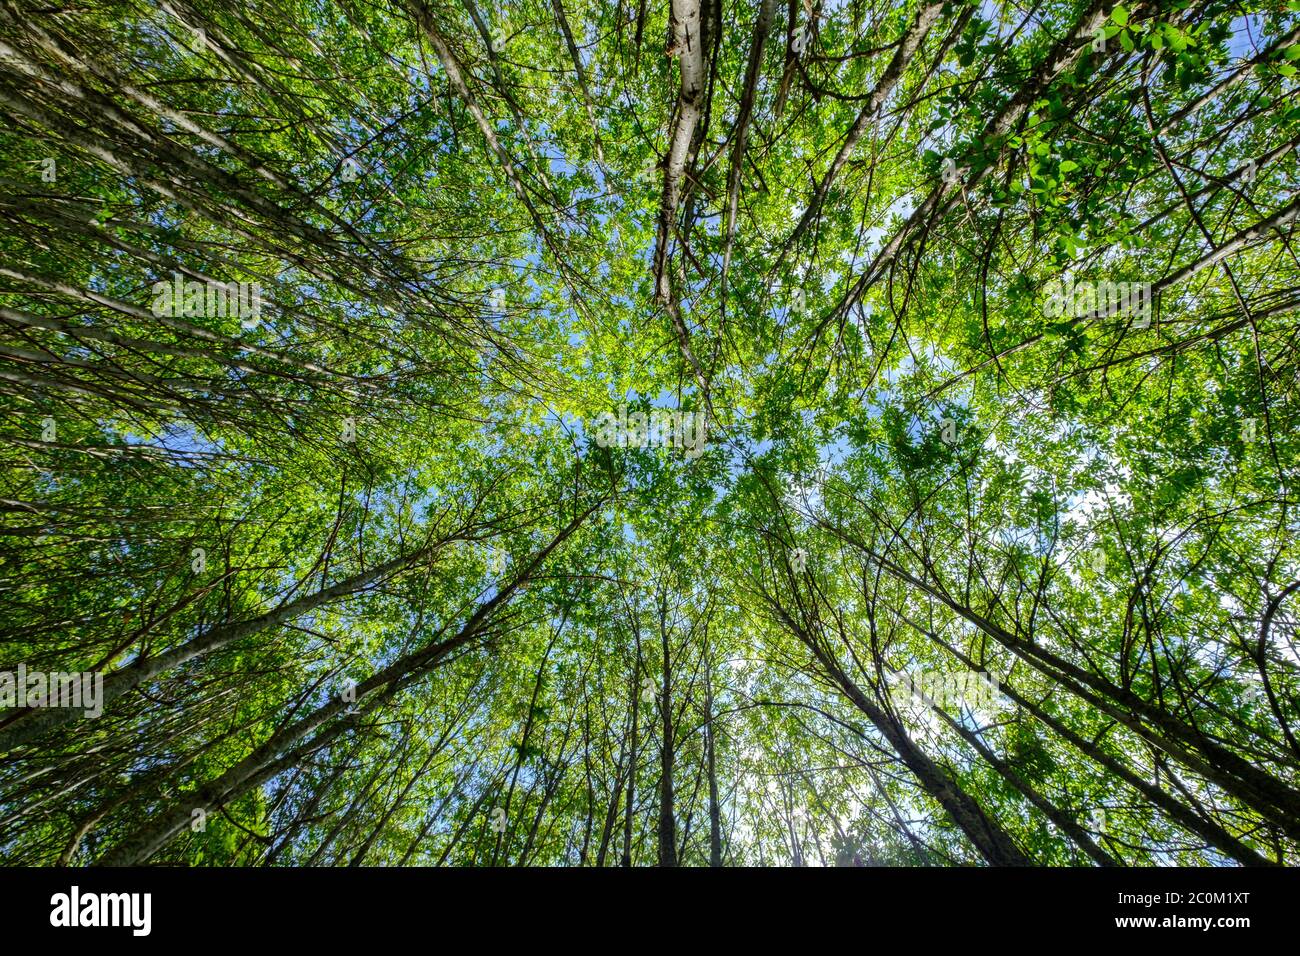 Trees upward nadir view to height in forest, growth and progress of nature concept reach the light achieving goals Stock Photo